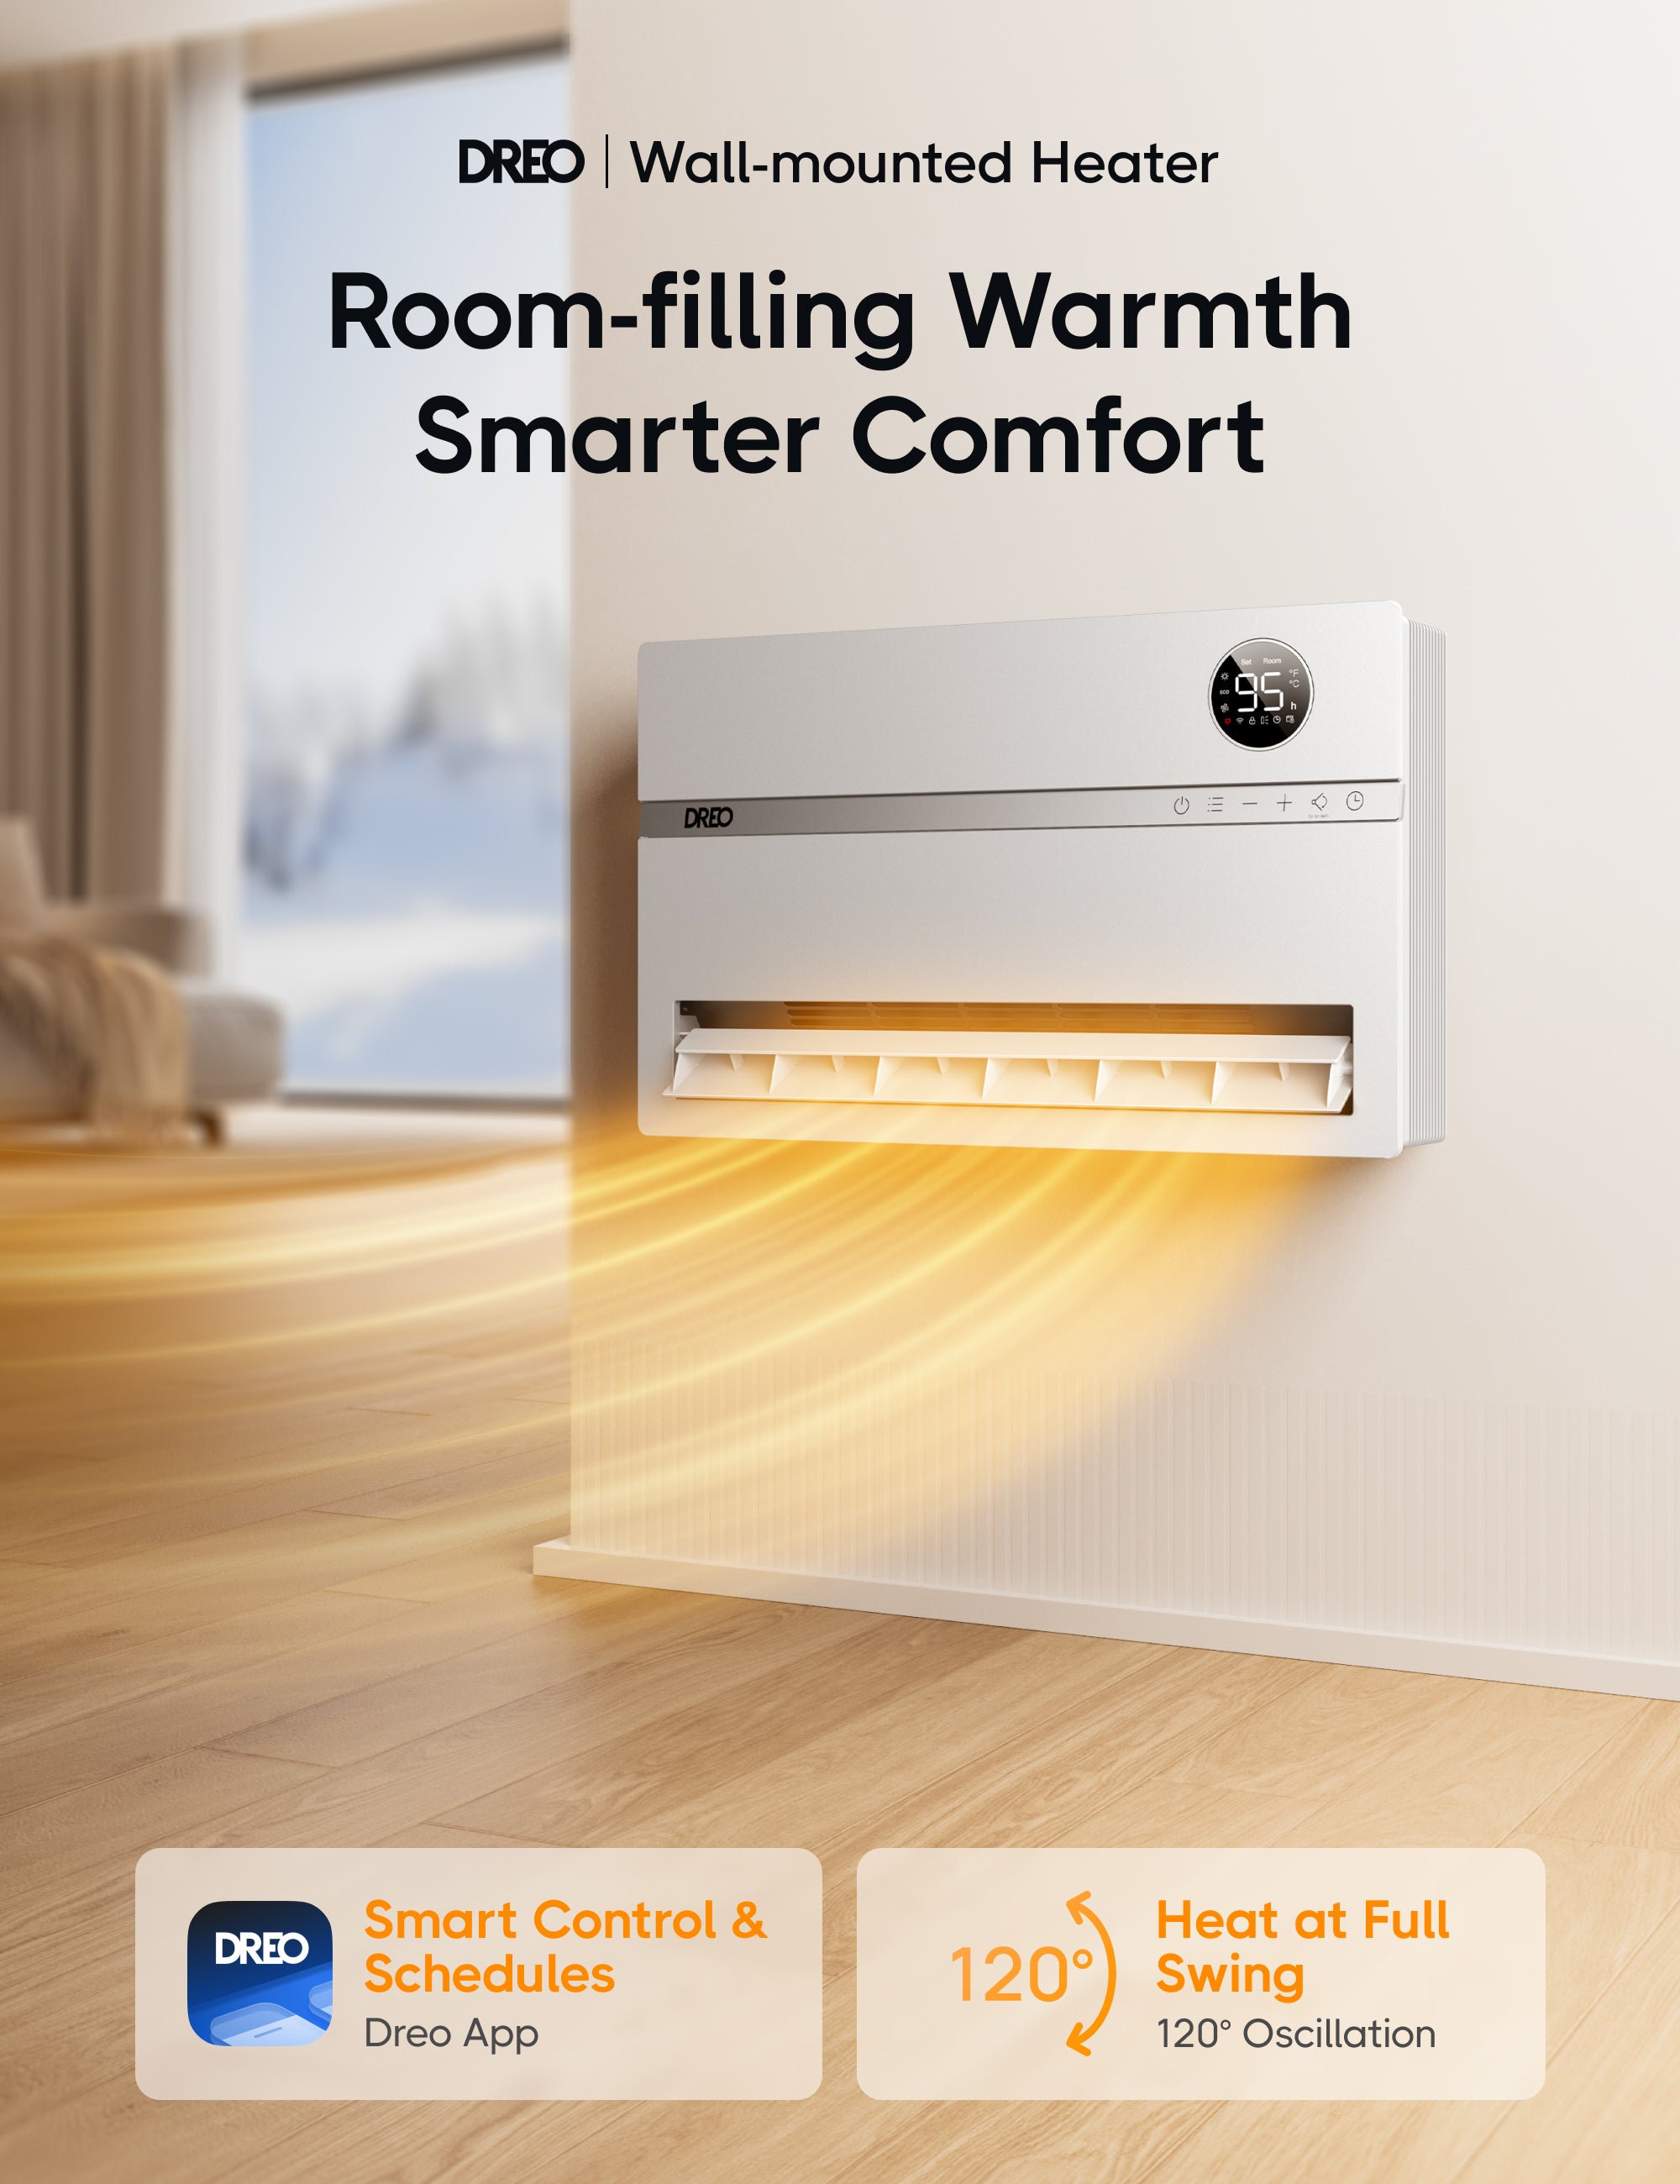 WH719S Smart Wall-mounted Heater